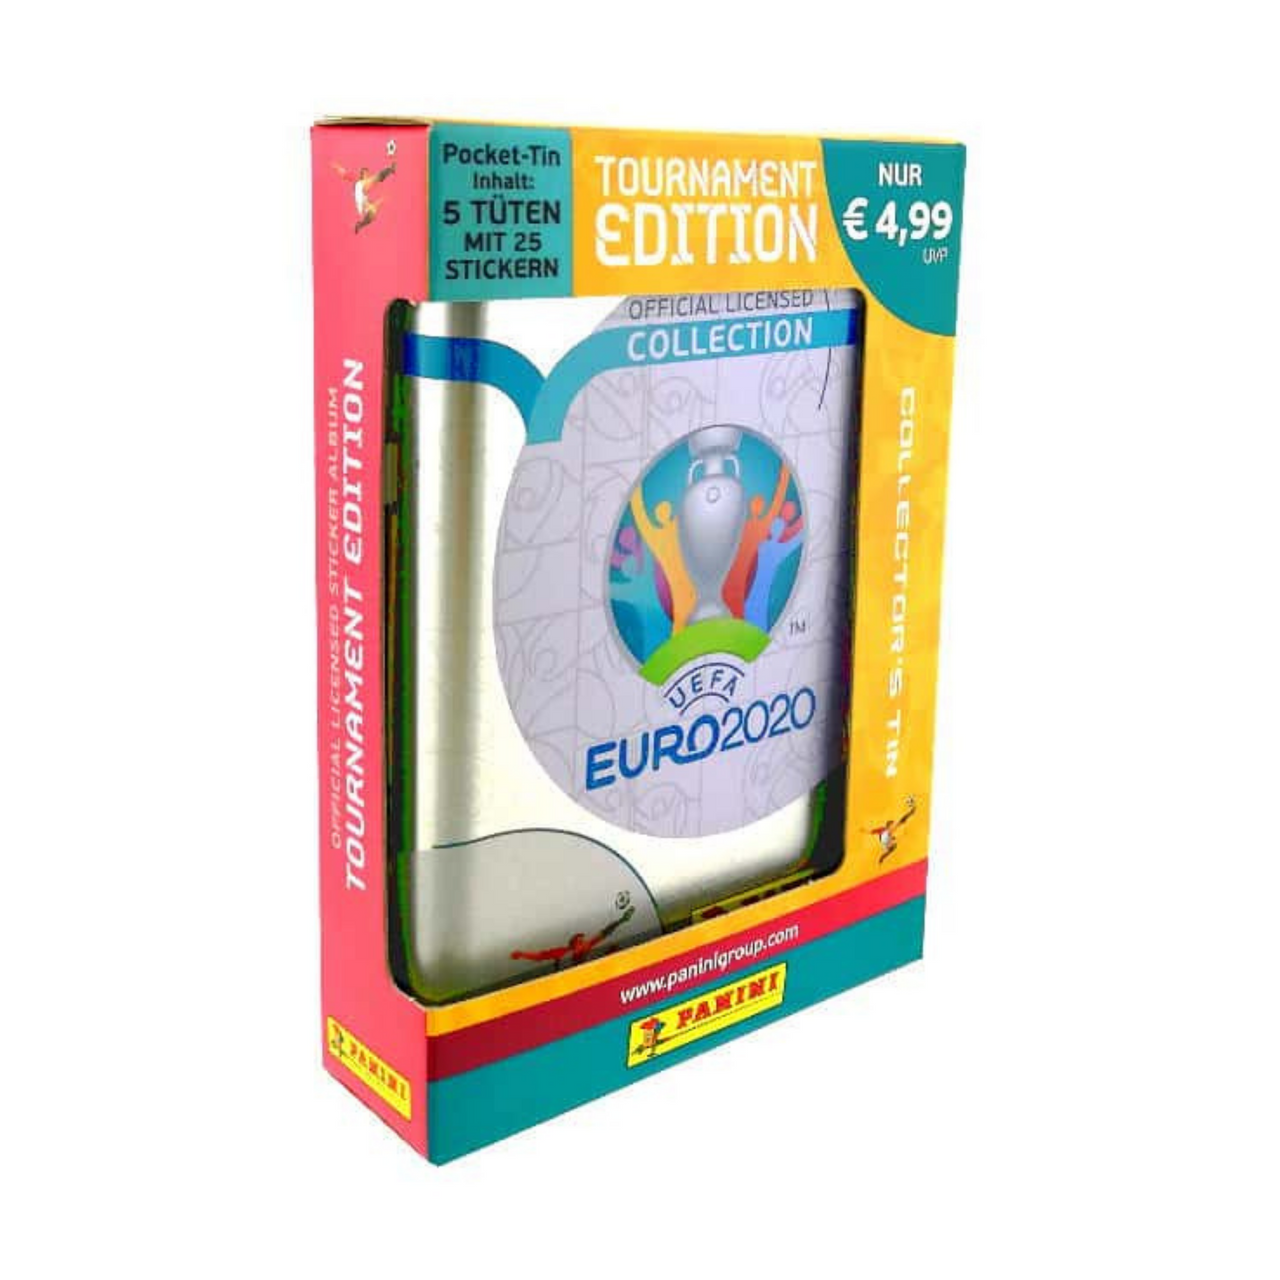 Panini EURO 2020 Tournament Edition Stickers - Tin Box with 5 Packets